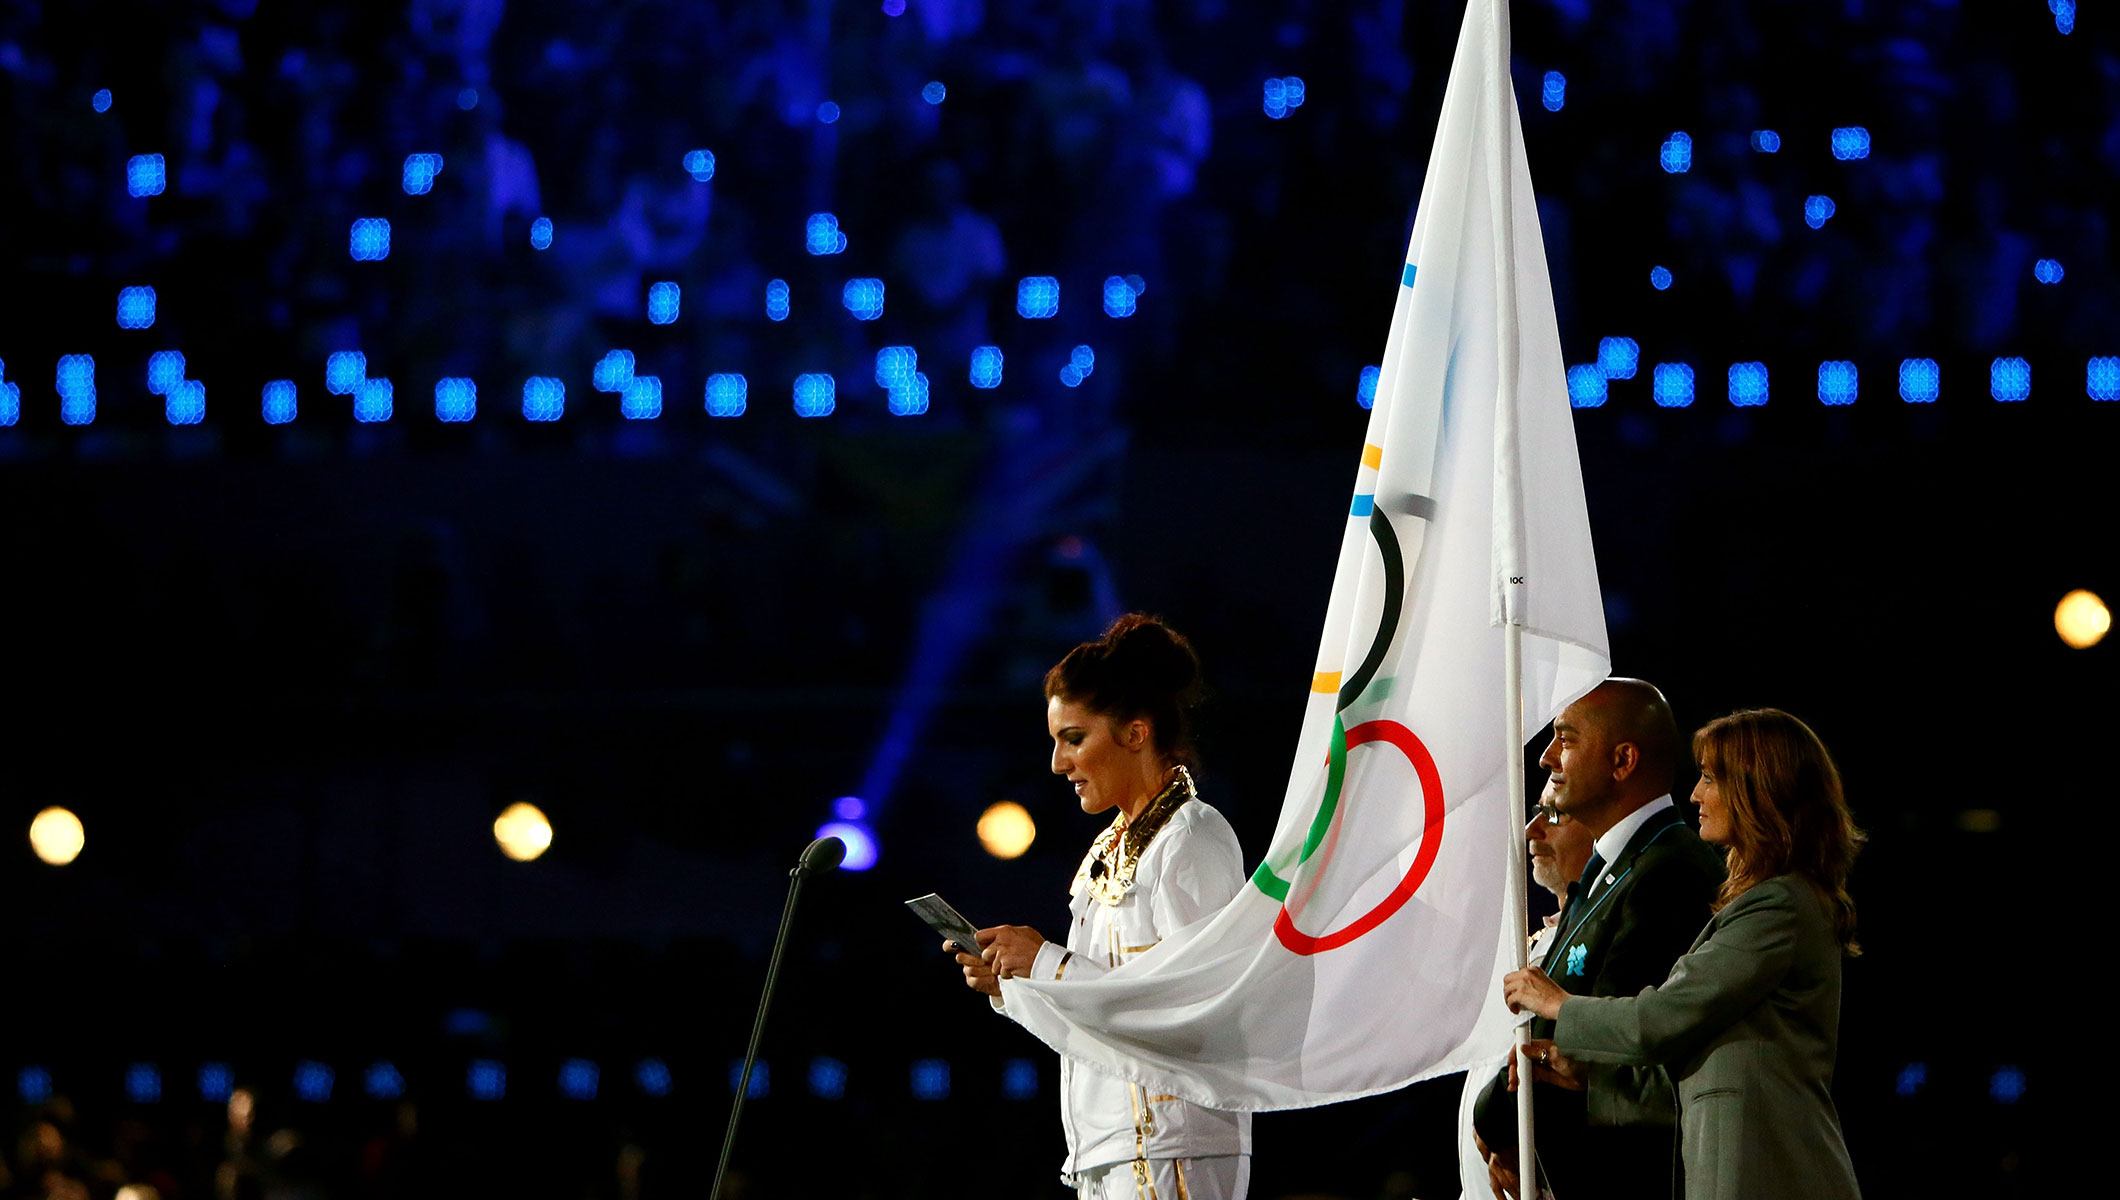 Athletes to take the lead as oaths at future Olympic Games openings are